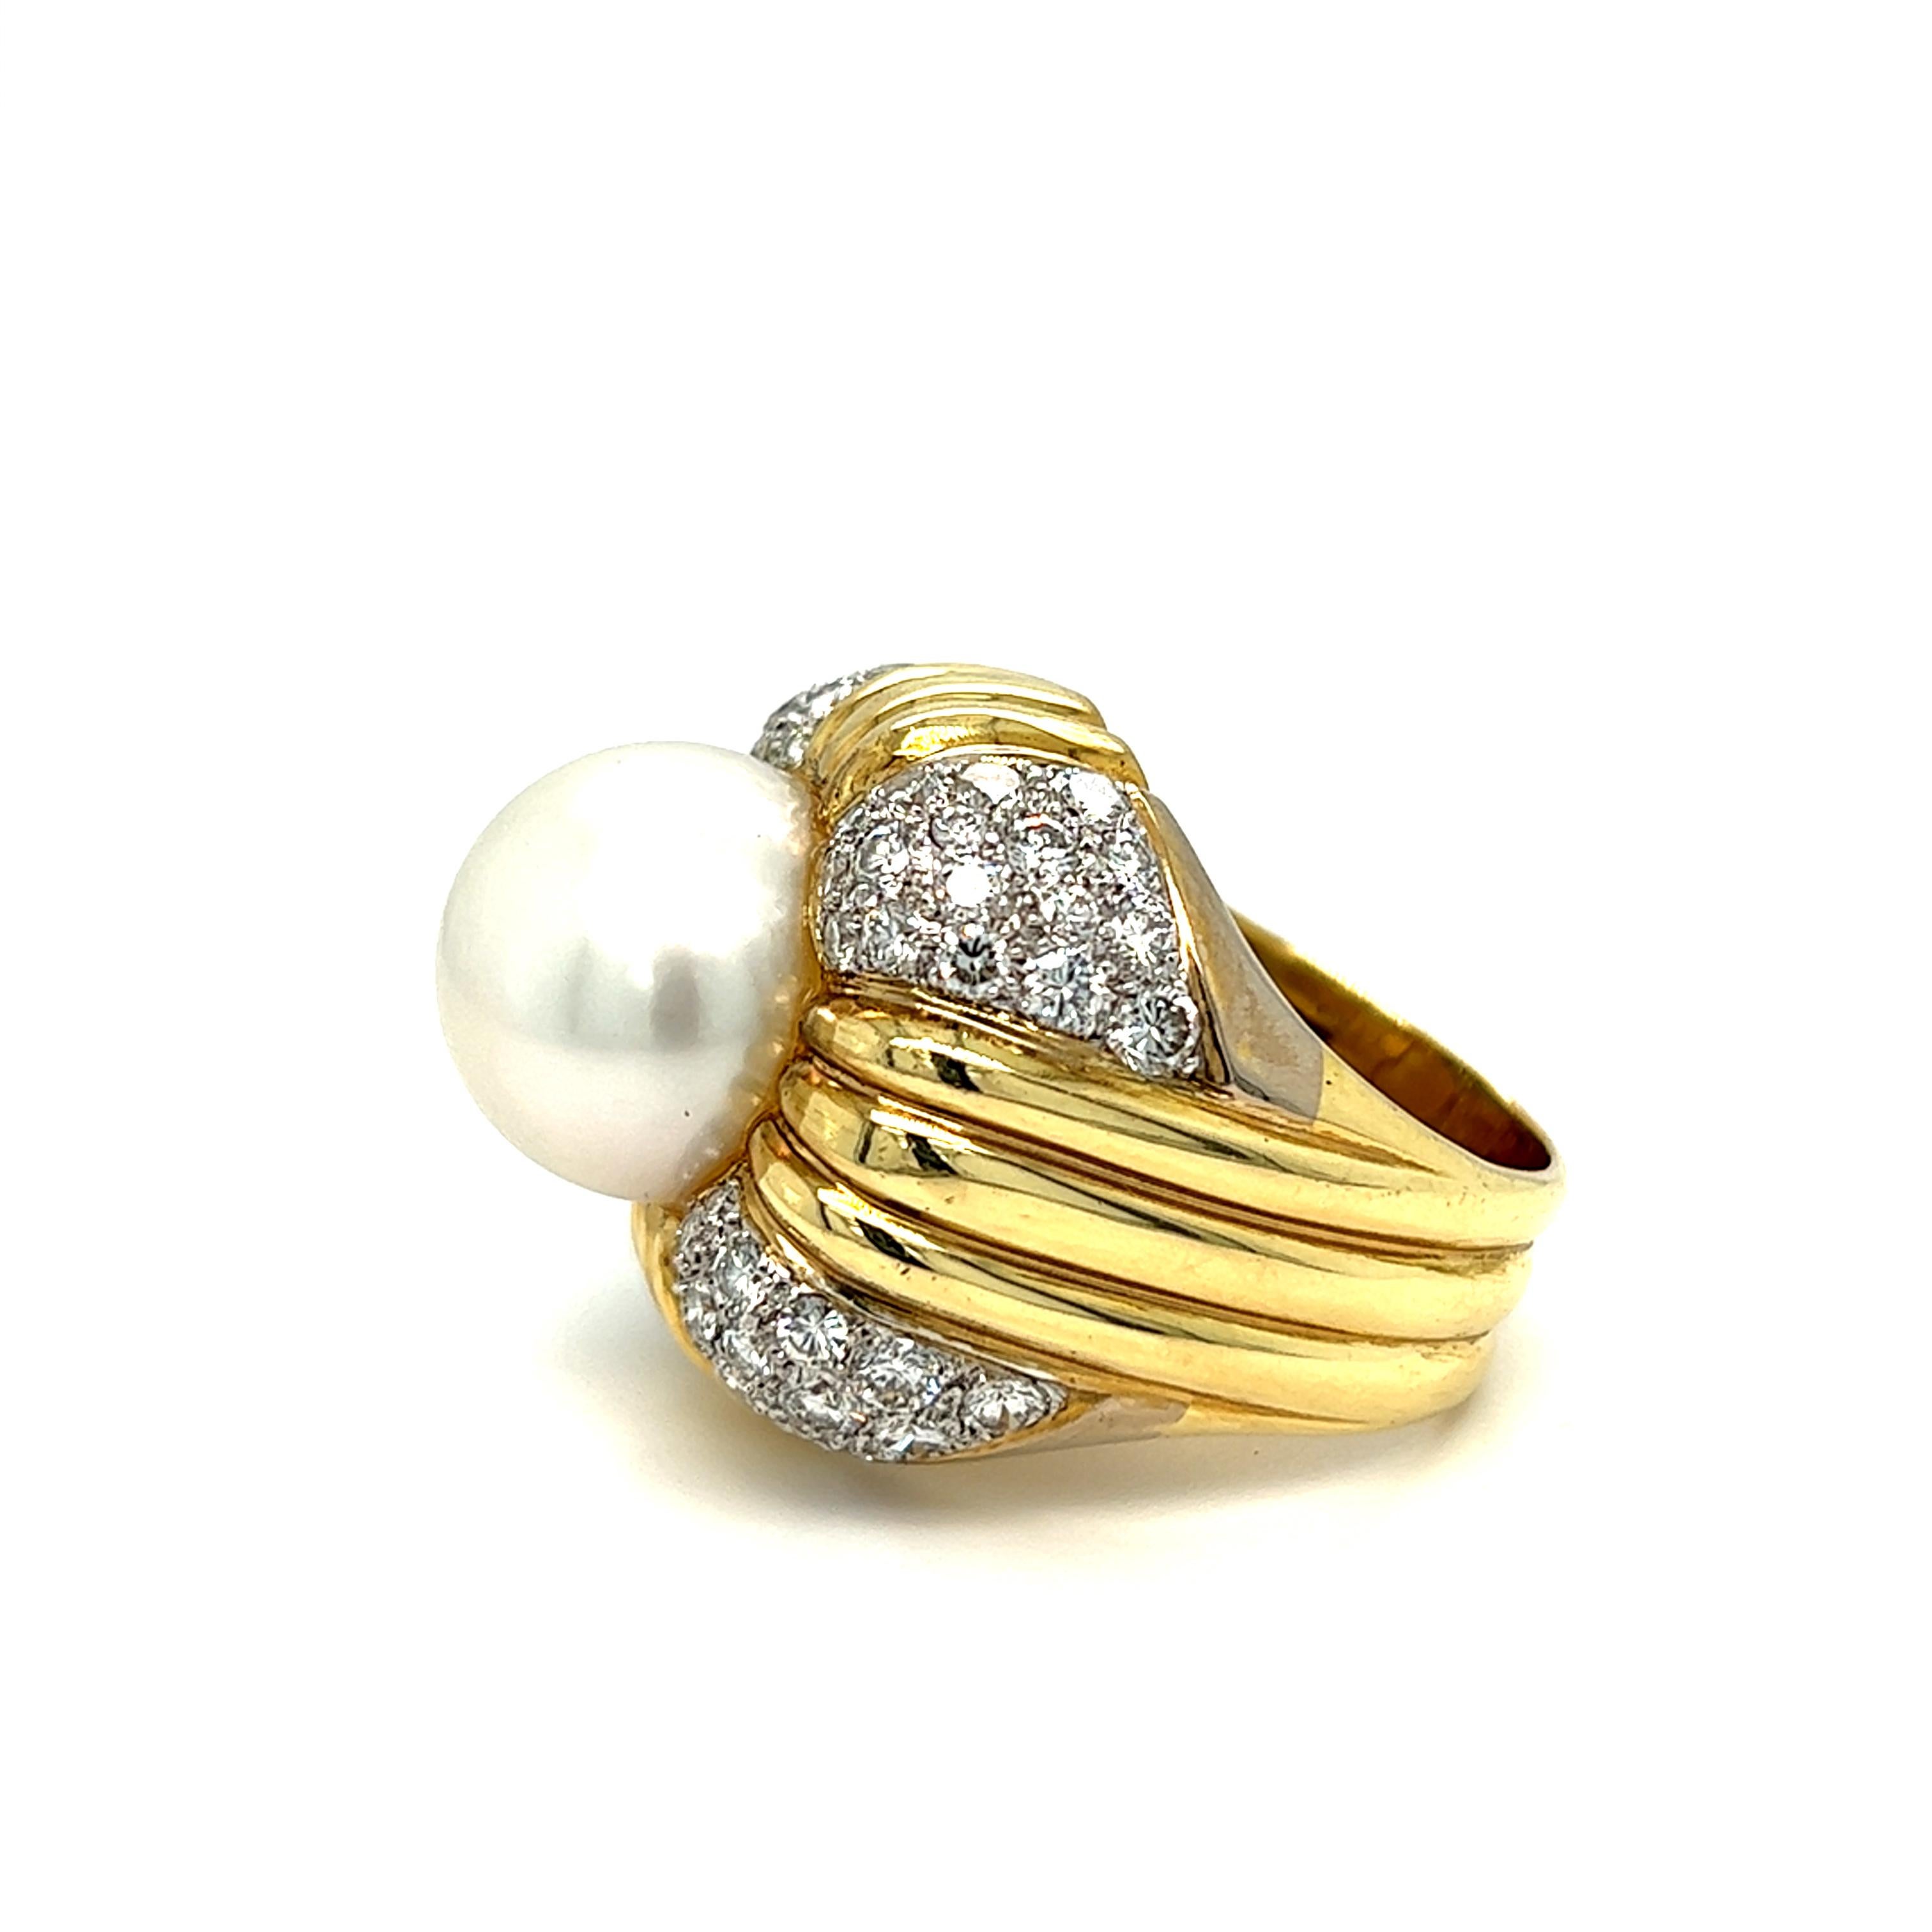 Estate Set of Pearl and Diamond Ring and Earrings Starburst 18k Yellow Gold In Excellent Condition For Sale In beverly hills, CA